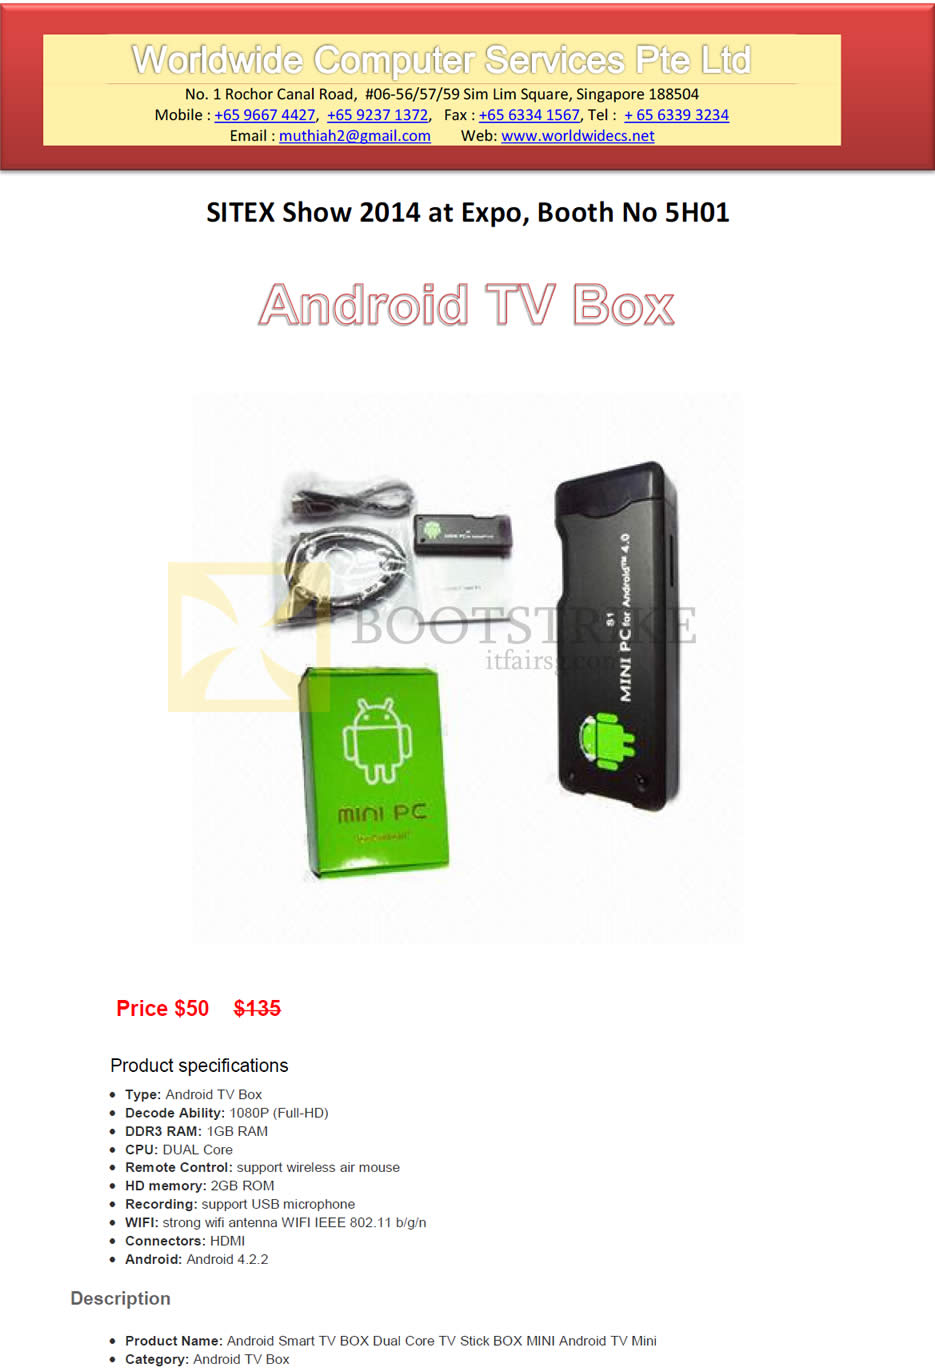 SITEX 2014 price list image brochure of Worldwide Computer Services Android TV Box